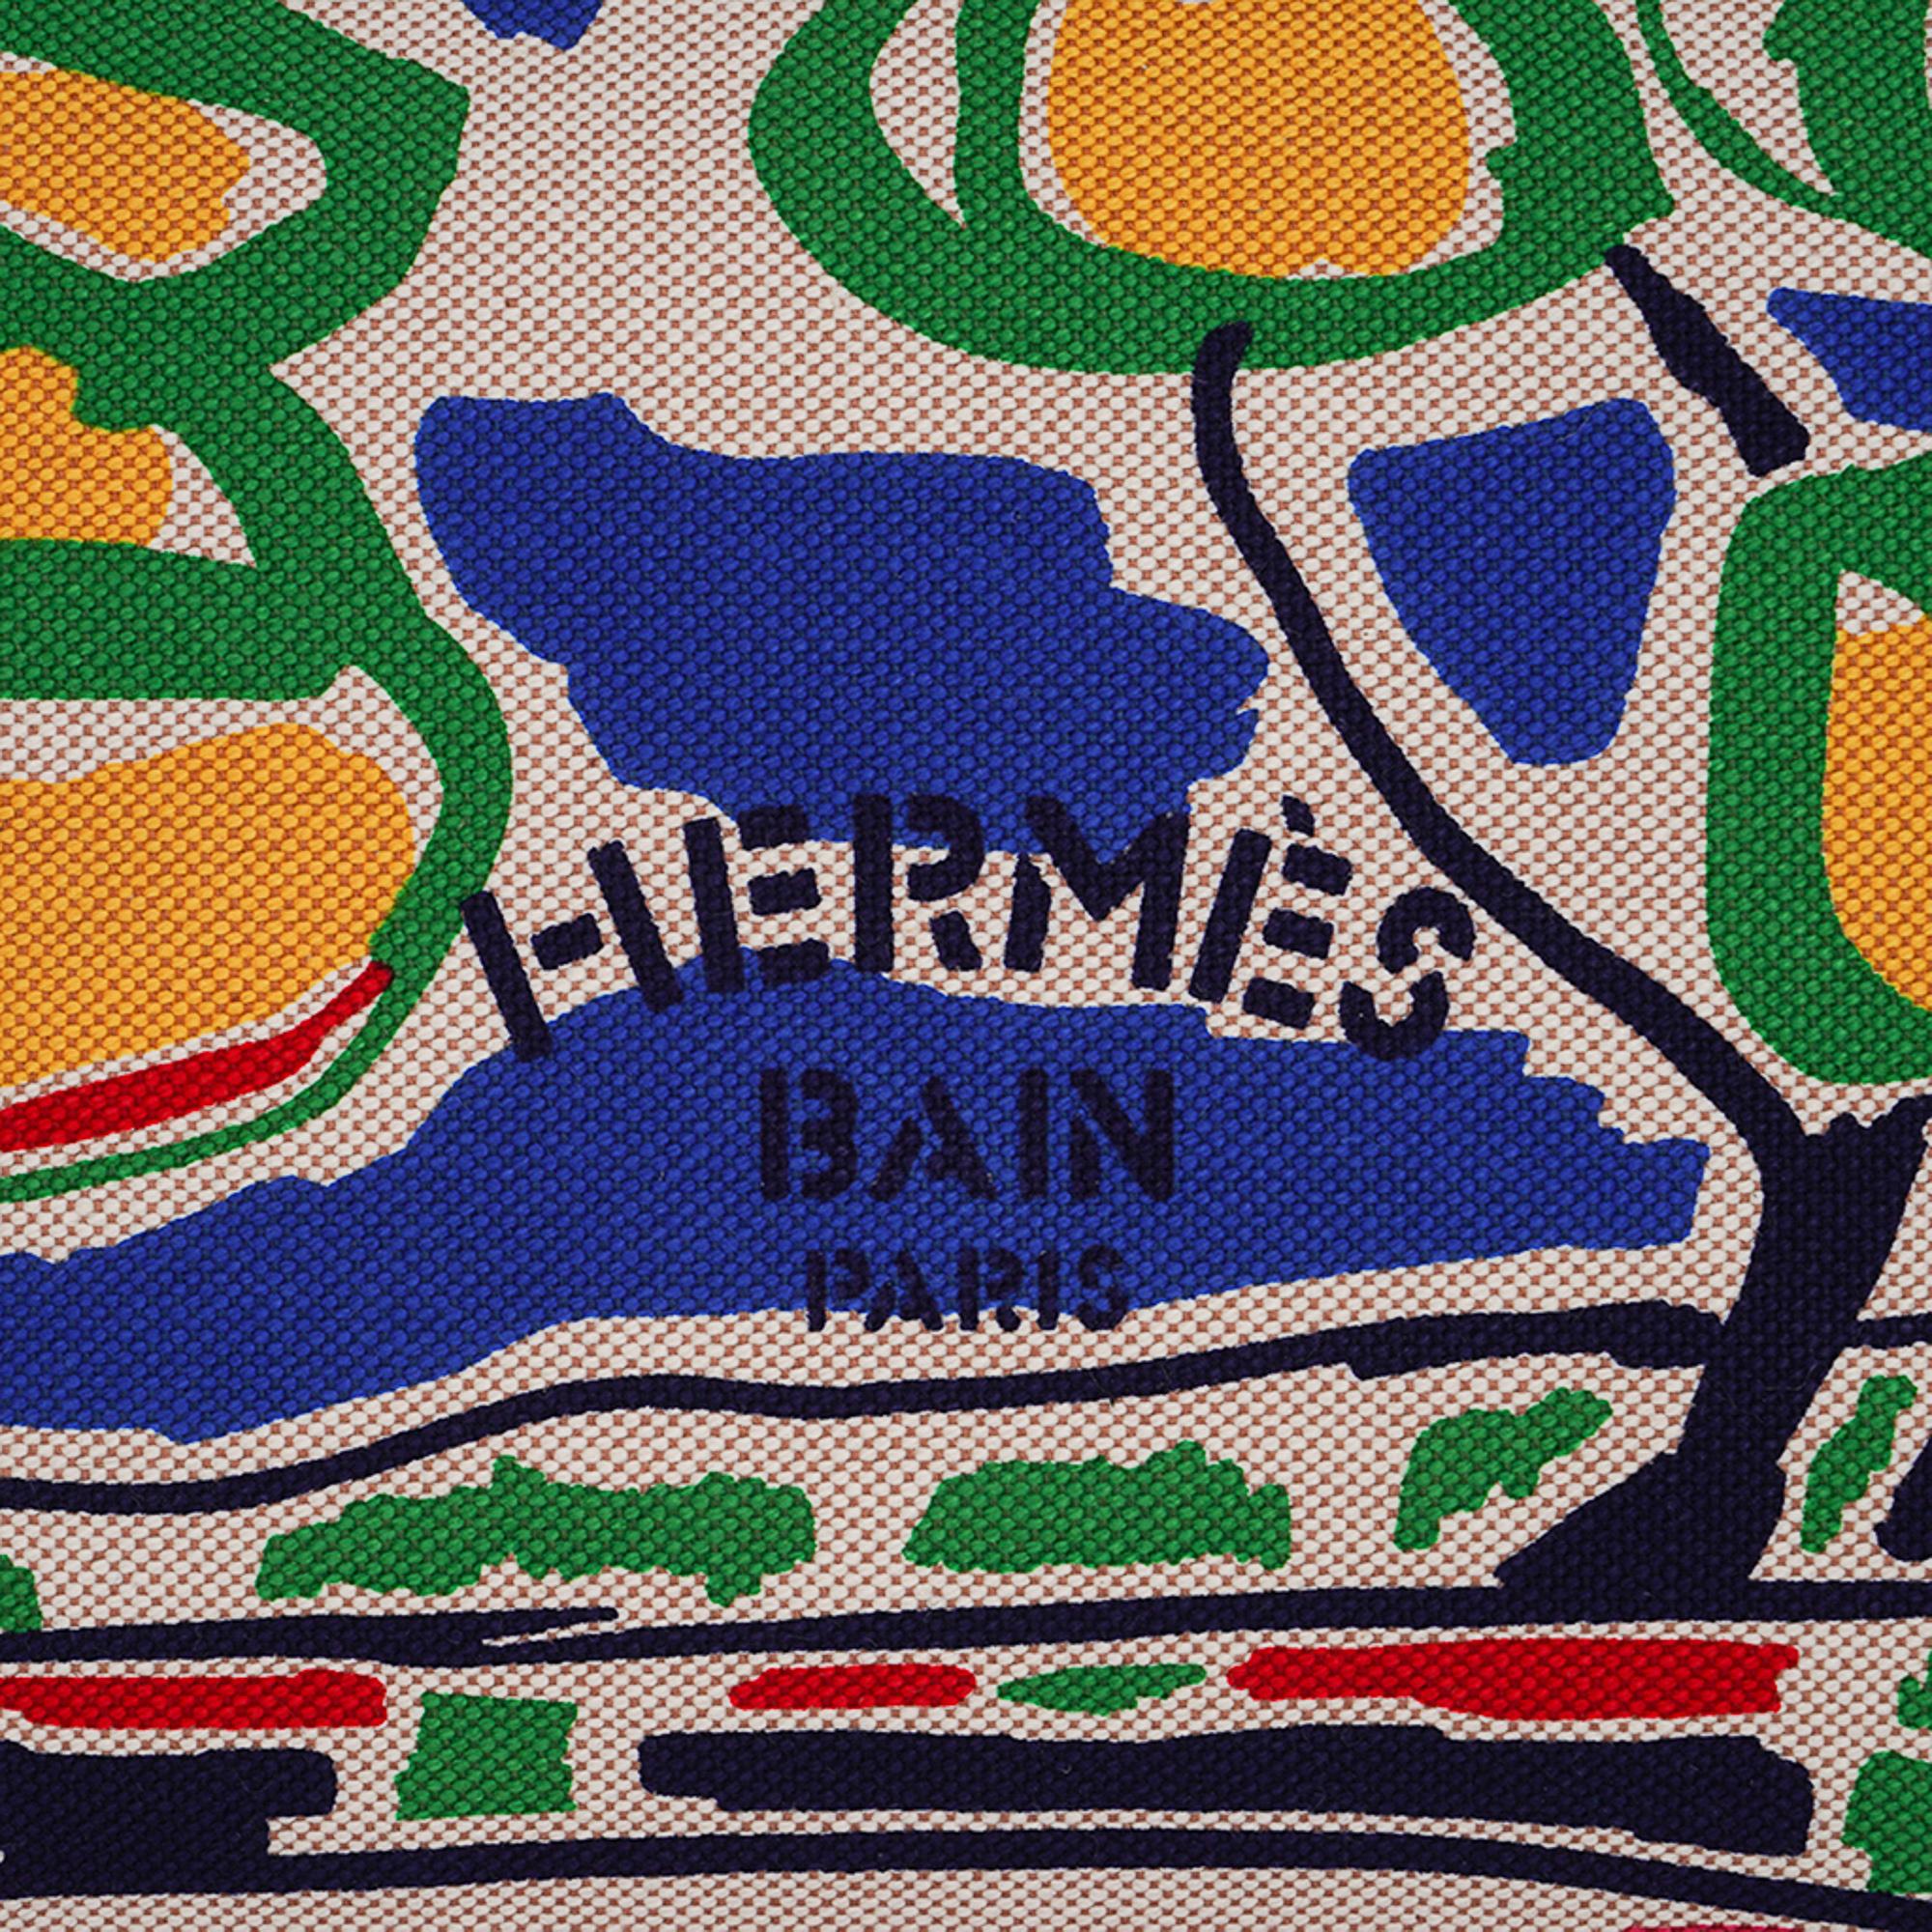 Mightychic offers an Hermes Bain Farniente flat case Rouge / Jaune in the medium model.
Beautifully screen printed (12 screens) in Toile with Blue, Green, Yellow colorway.
Designed by Filipe Jardim.
Top zipper with embossed metal pull.
Cotton canvas